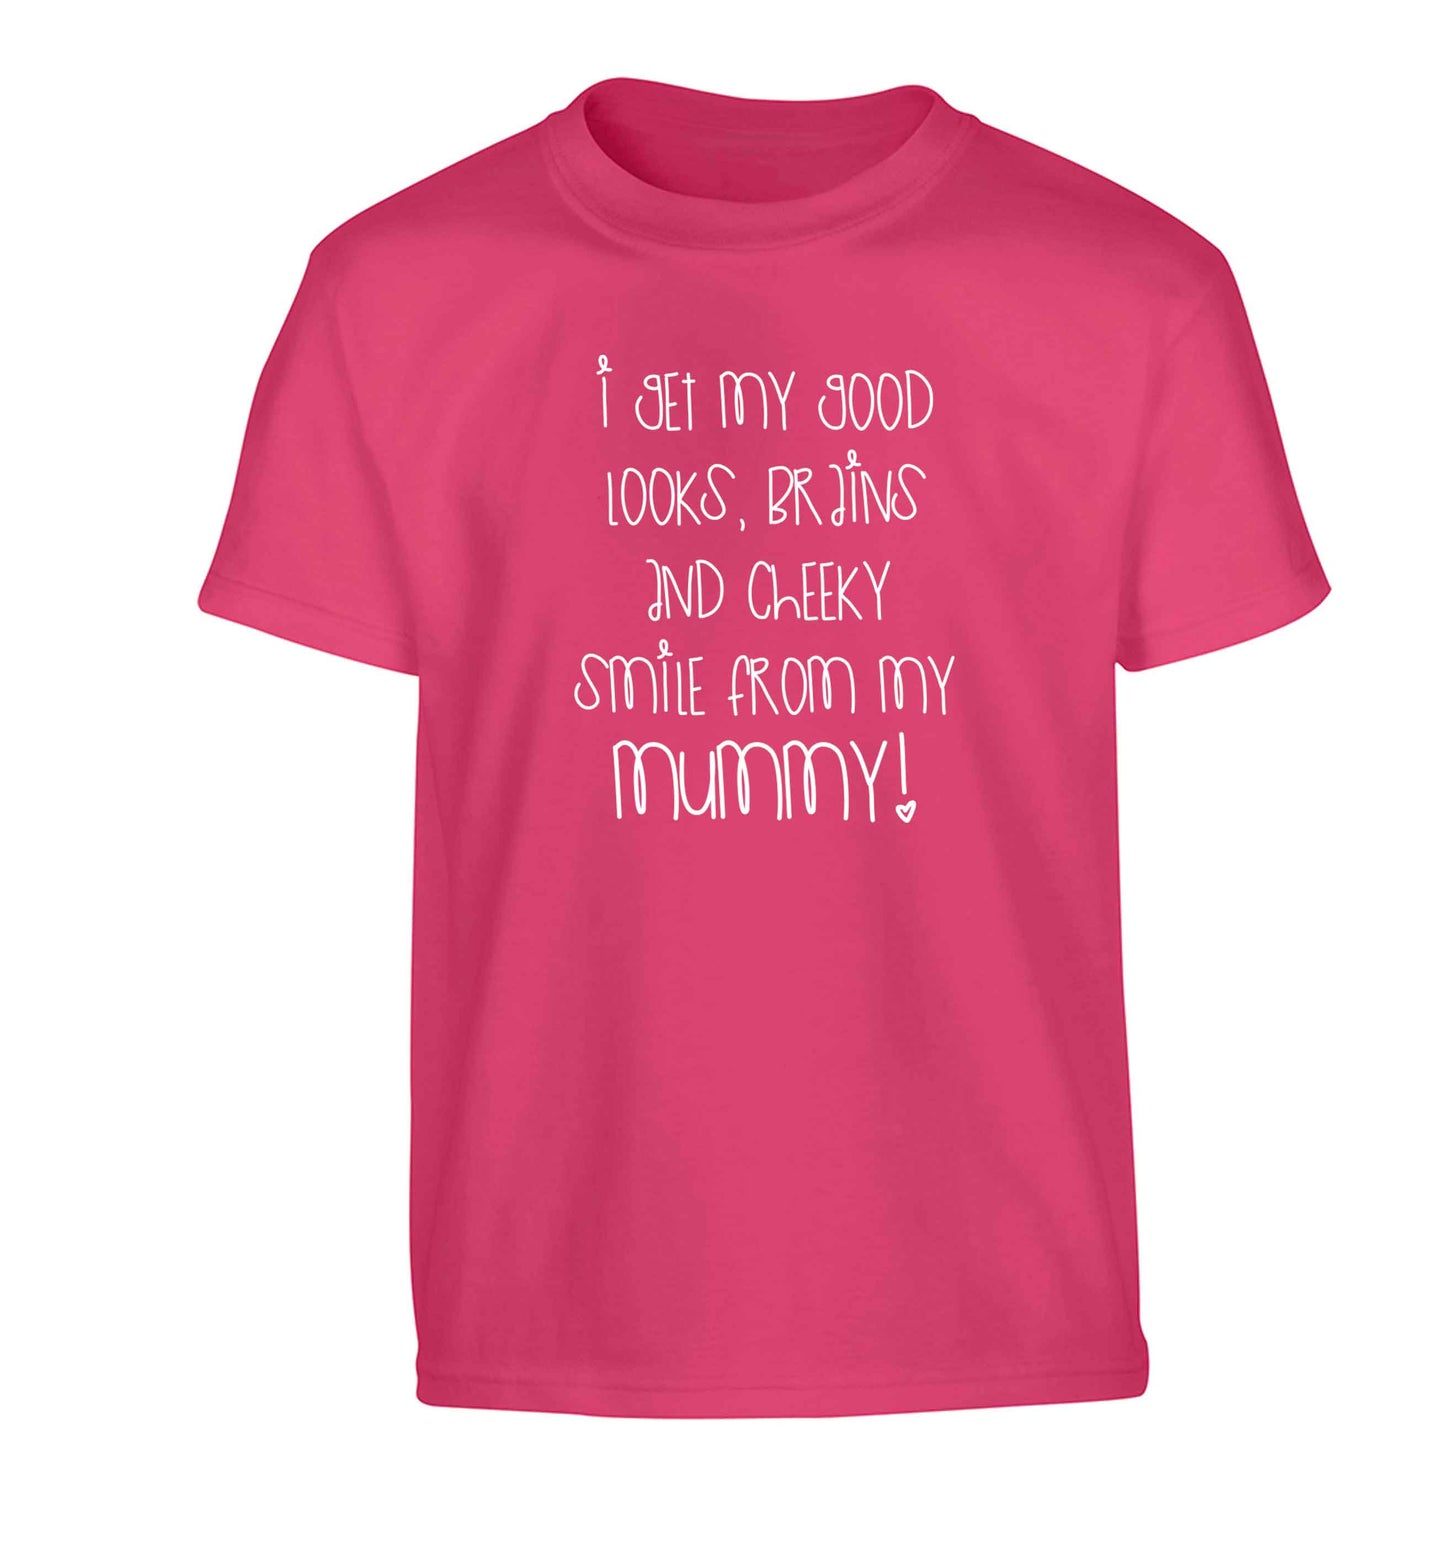 I get my good looks, brains and cheeky smile from my mummy Children's pink Tshirt 12-13 Years